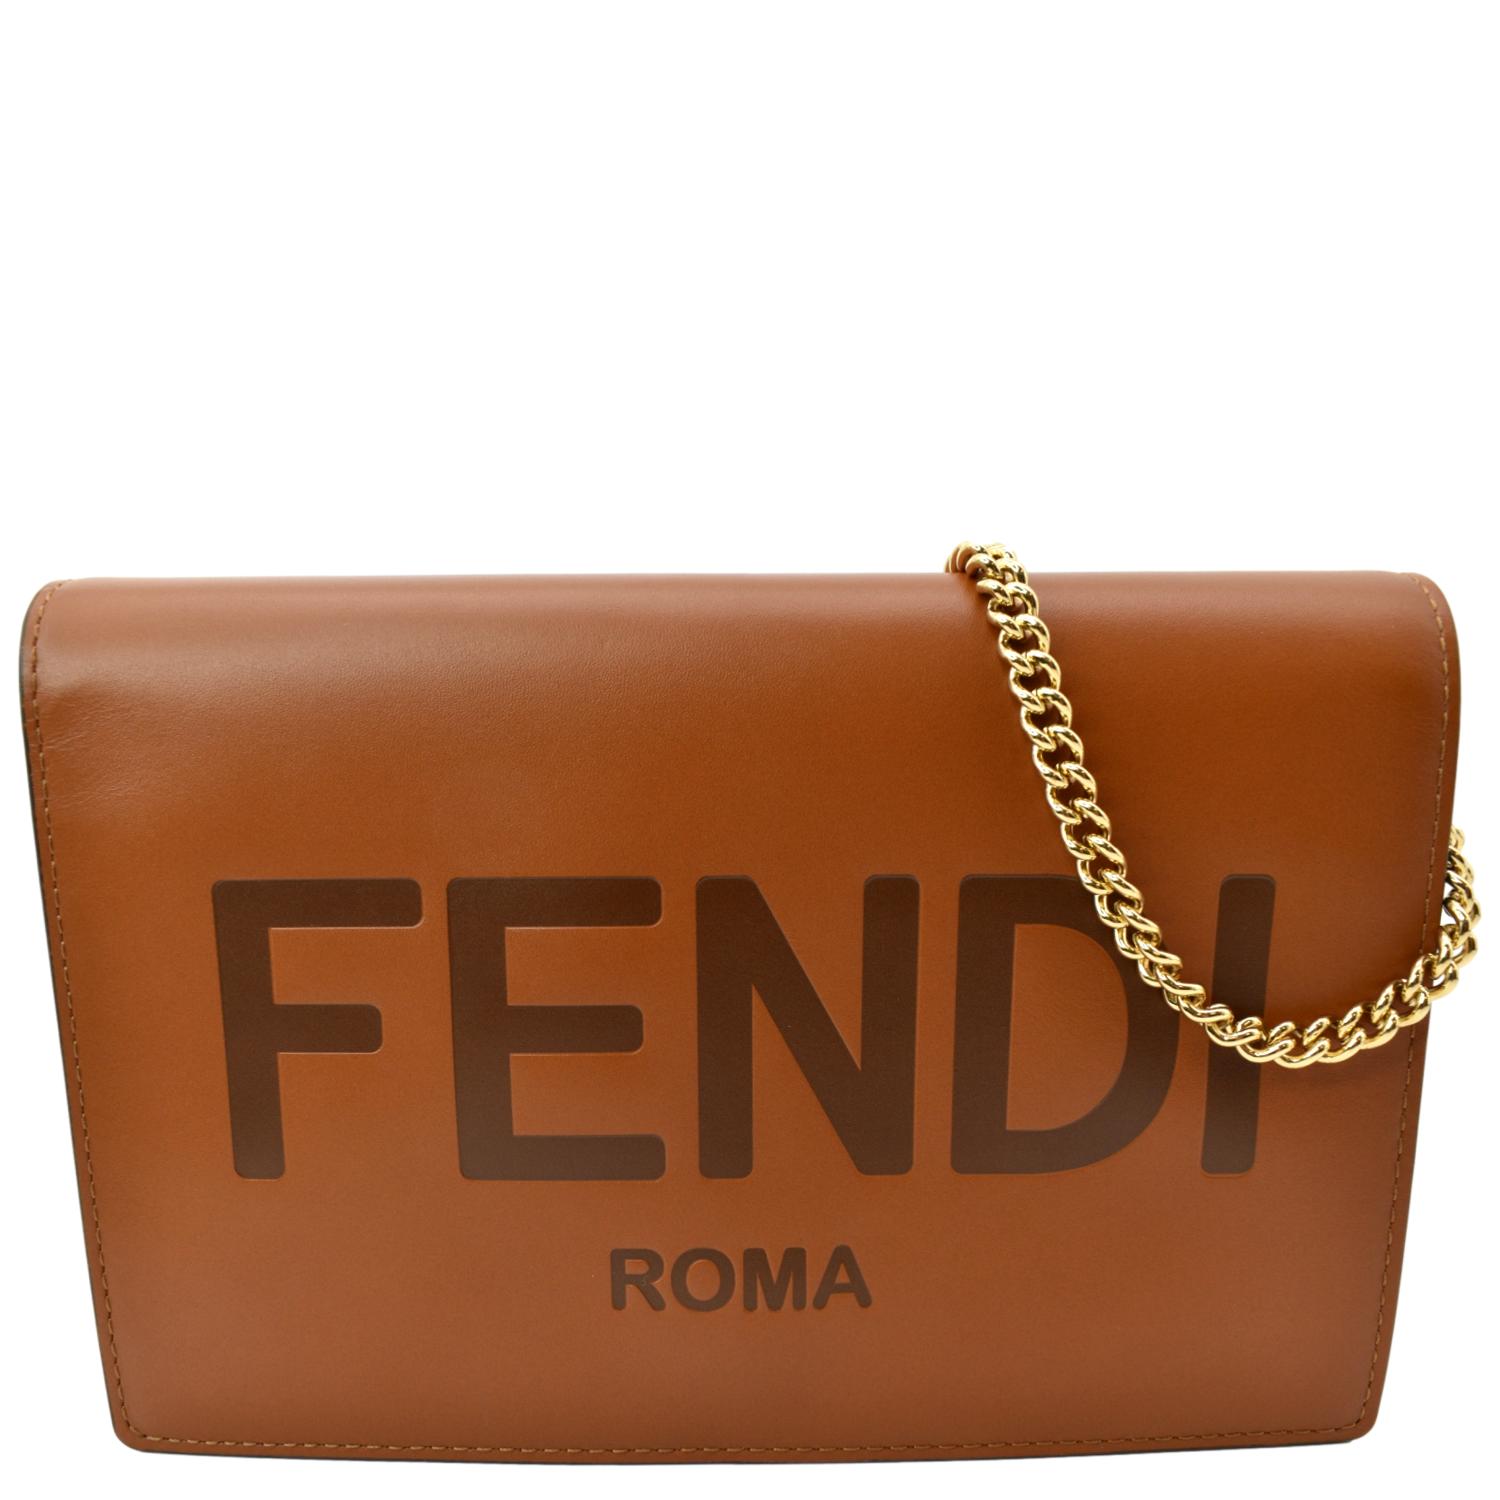 Fendi - Authenticated Wallet on Chain Handbag - Leather Grey for Women, Never Worn